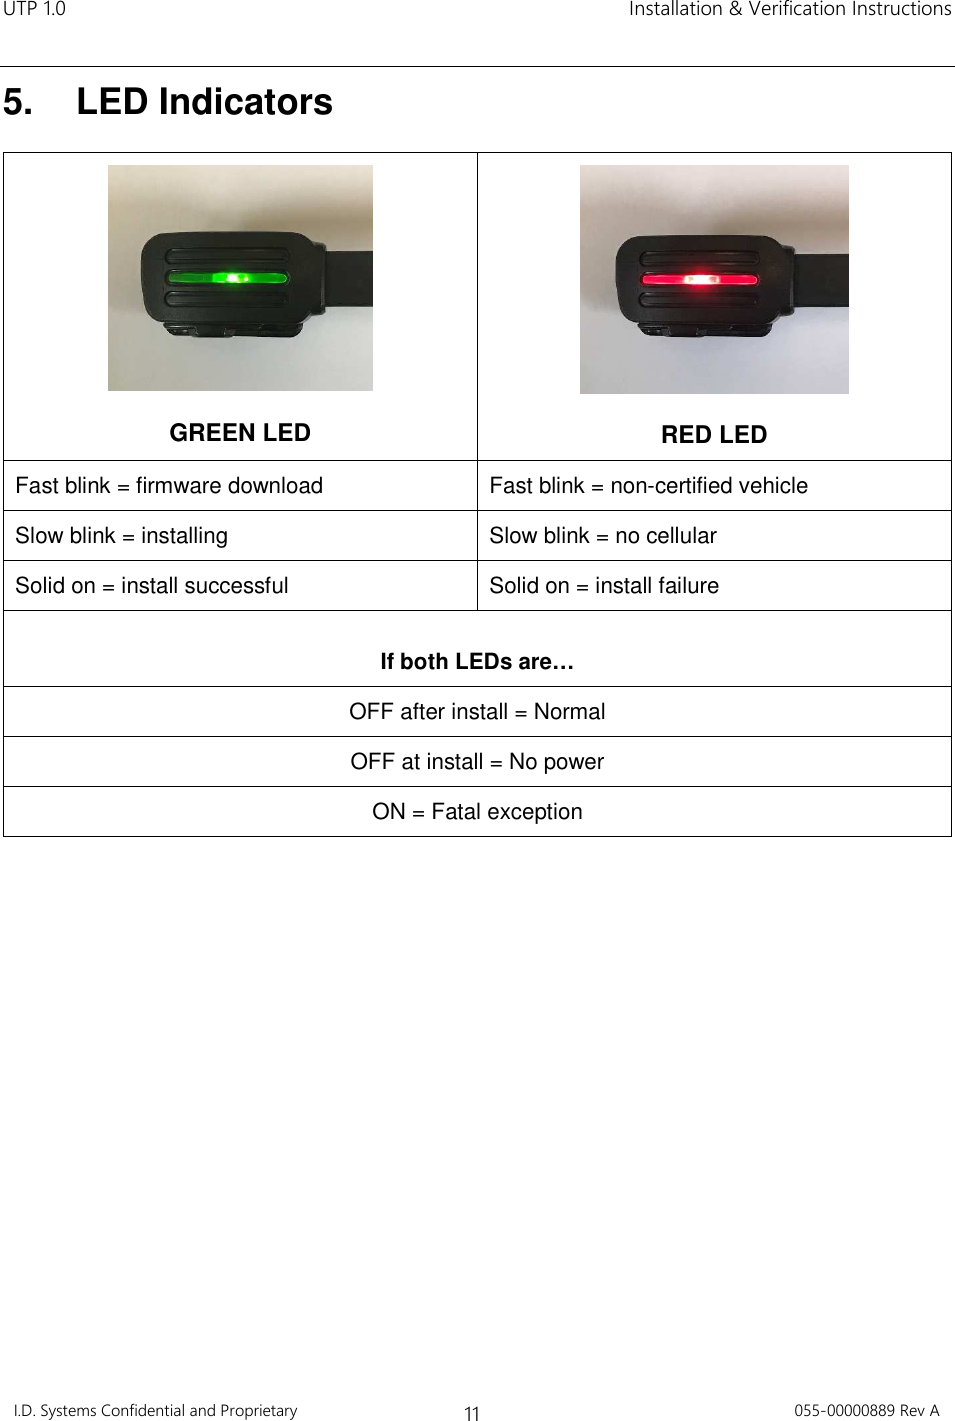 UTP 1.0    Installation &amp; Verification Instructions I.D. Systems Confidential and Proprietary 11 055-00000889 Rev A  5.  LED Indicators   GREEN LED   RED LED Fast blink = firmware download  Fast blink = non-certified vehicle Slow blink = installing  Slow blink = no cellular Solid on = install successful  Solid on = install failure  If both LEDs are… OFF after install = Normal OFF at install = No power ON = Fatal exception     